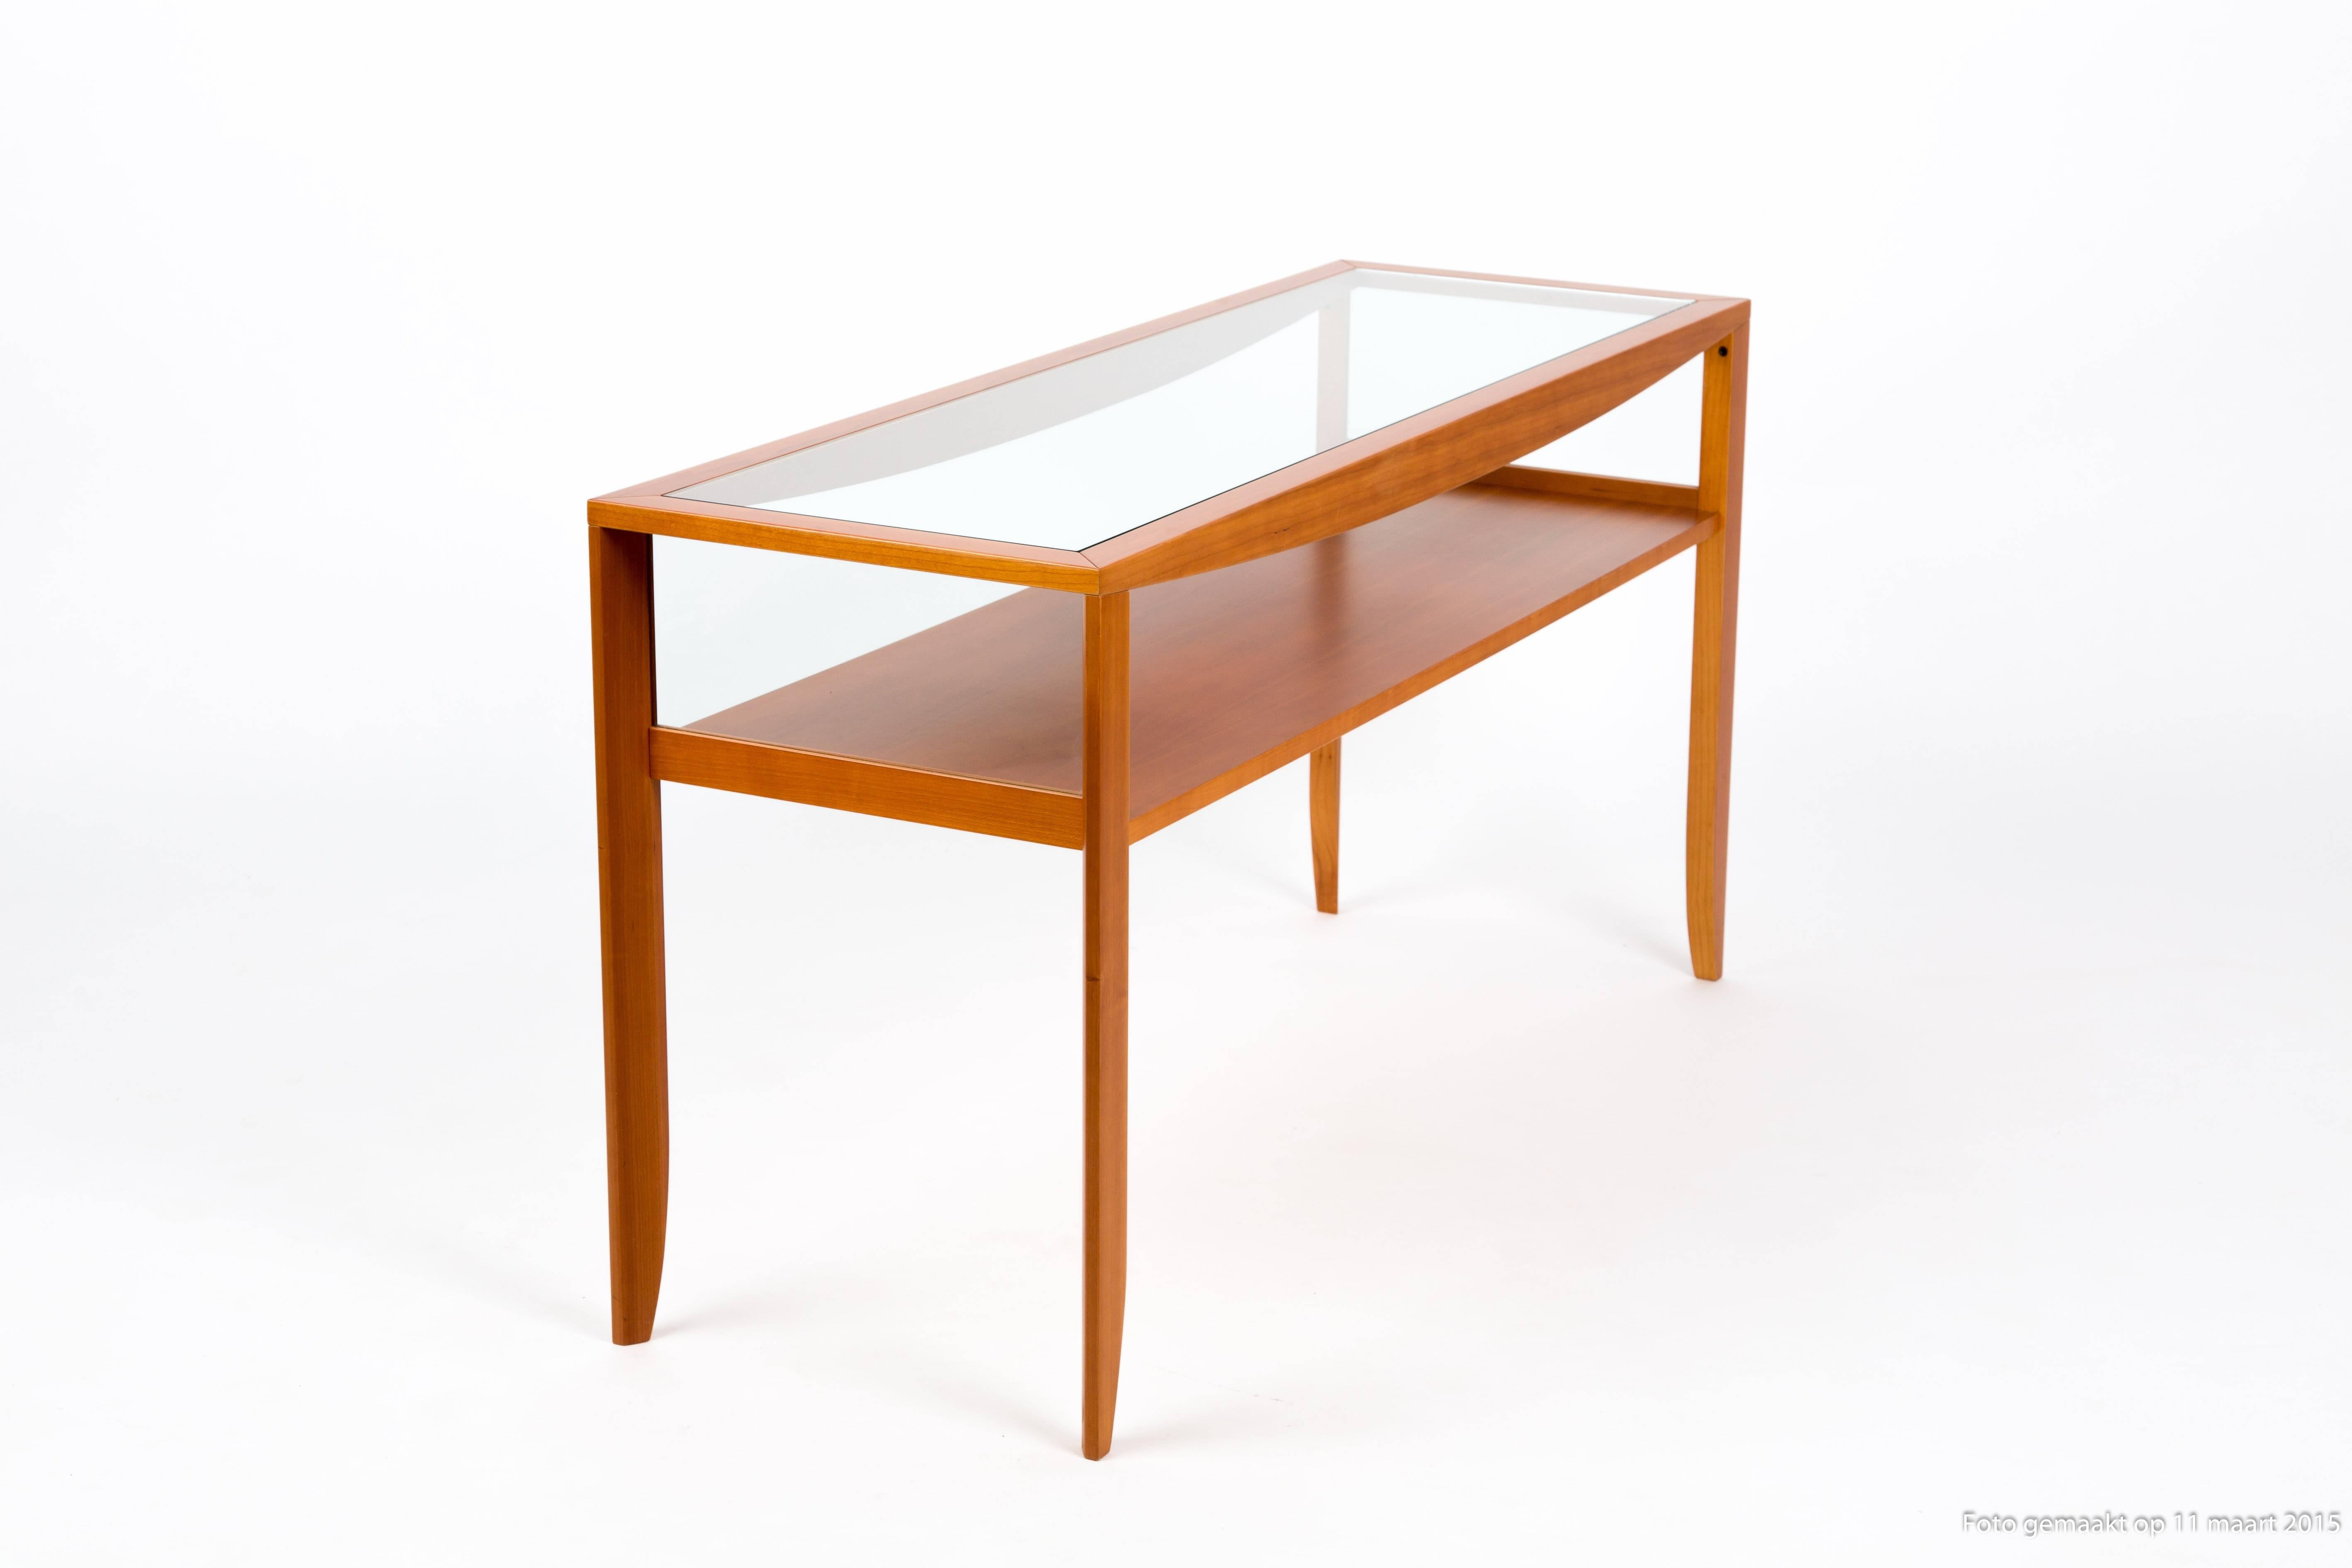 ITALIAN CATALAN SIDEBOARD. The cherrywood legs and top have an organic shape. The top is of glass. You can use it in the middle of some chairs, or as a real sideboard. The form is very minimalistic.